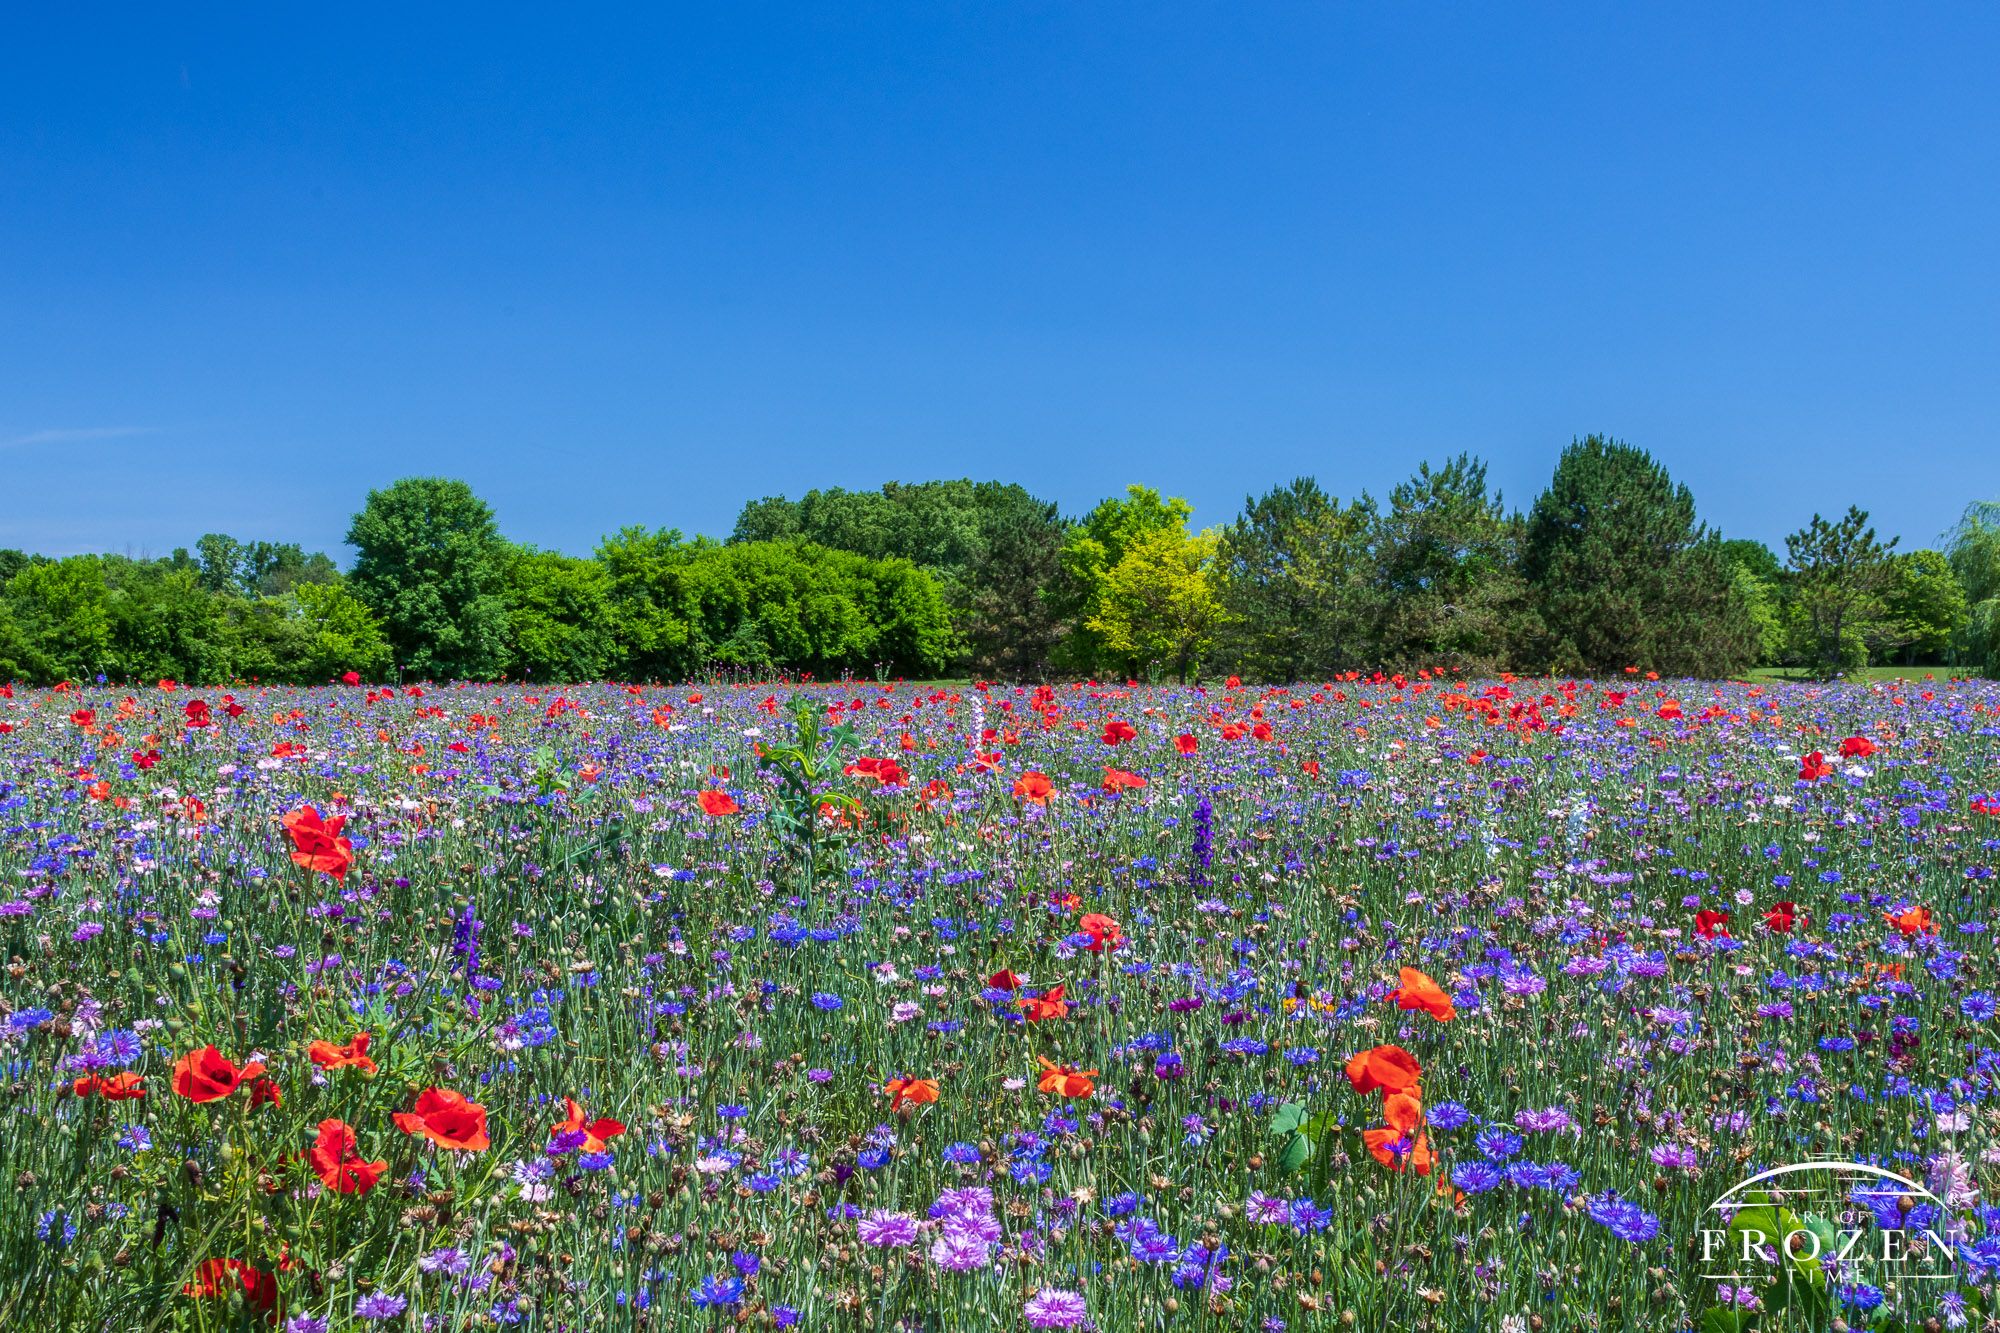 A field of red poppies and pink and purple flowers growing under the summer sun